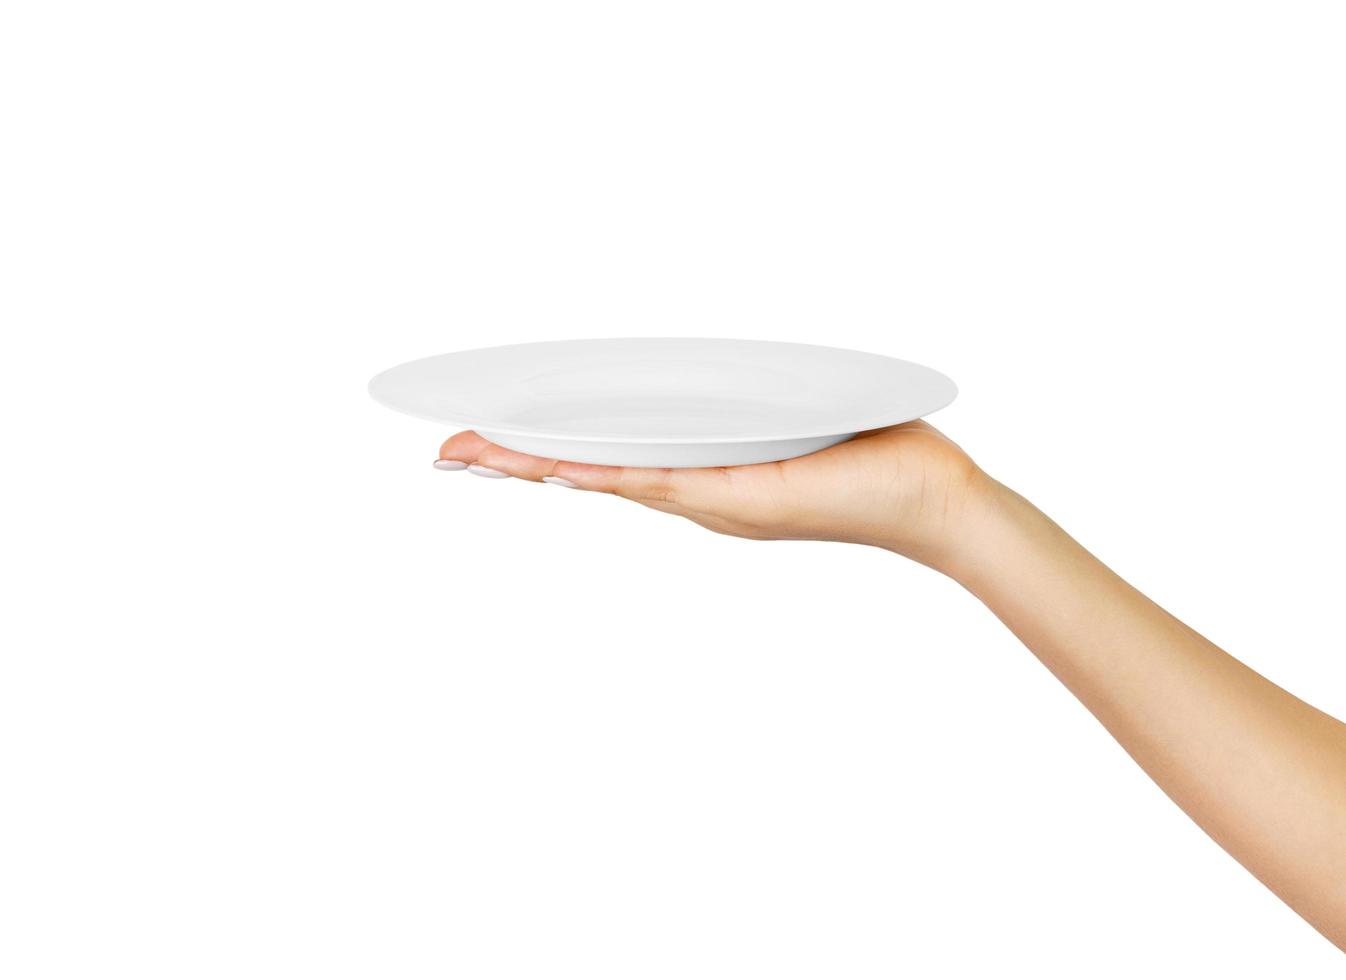 Blank empty round plate in female hand. perspective view, isolated on white background photo